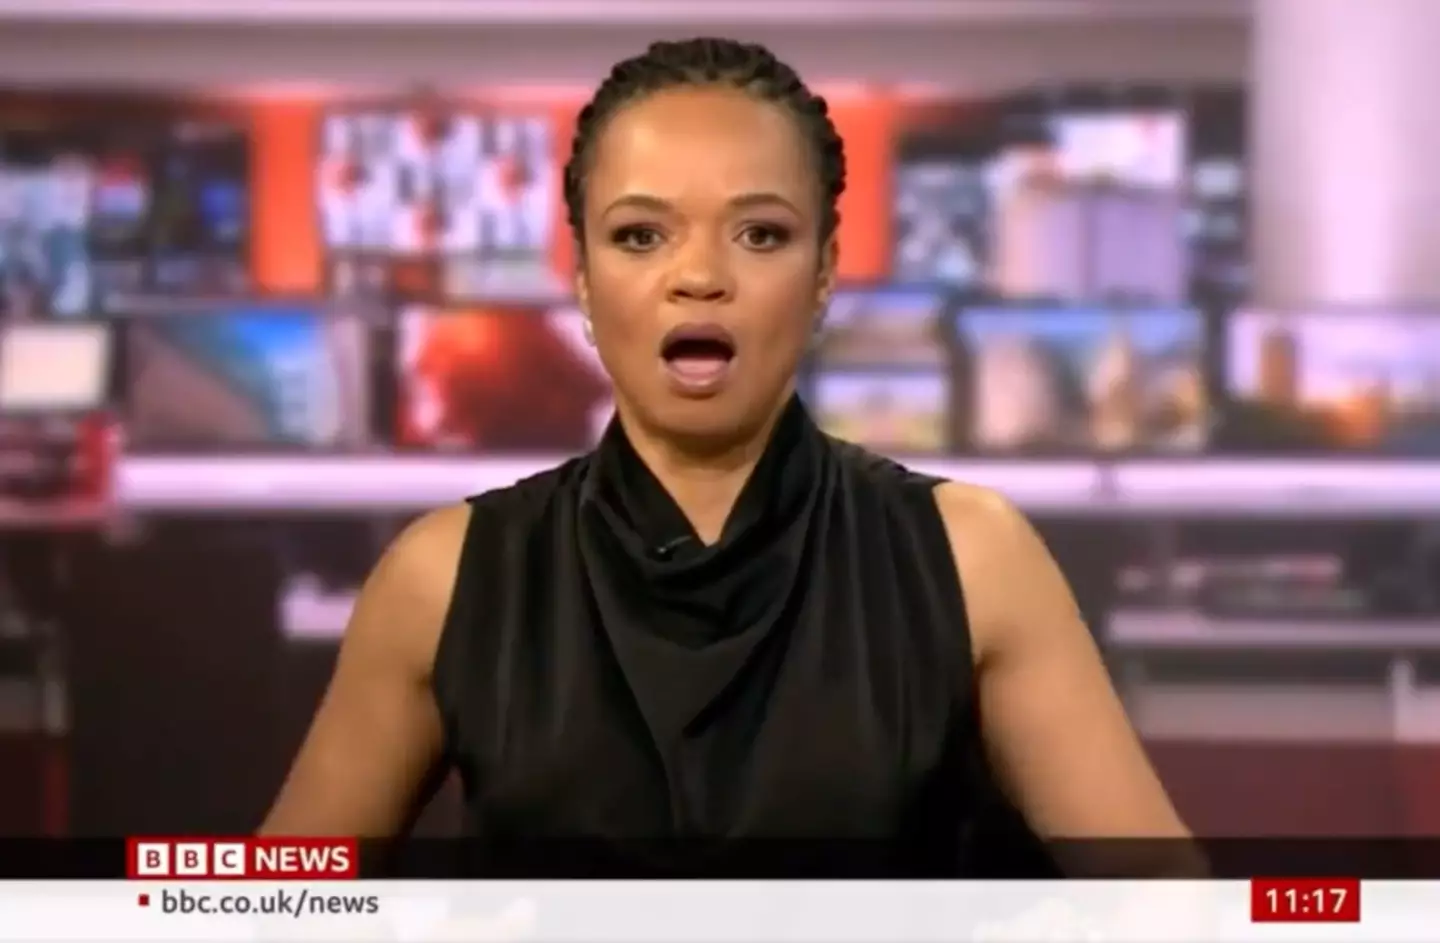 The BBC News anchor suddenly realised she was back on air.